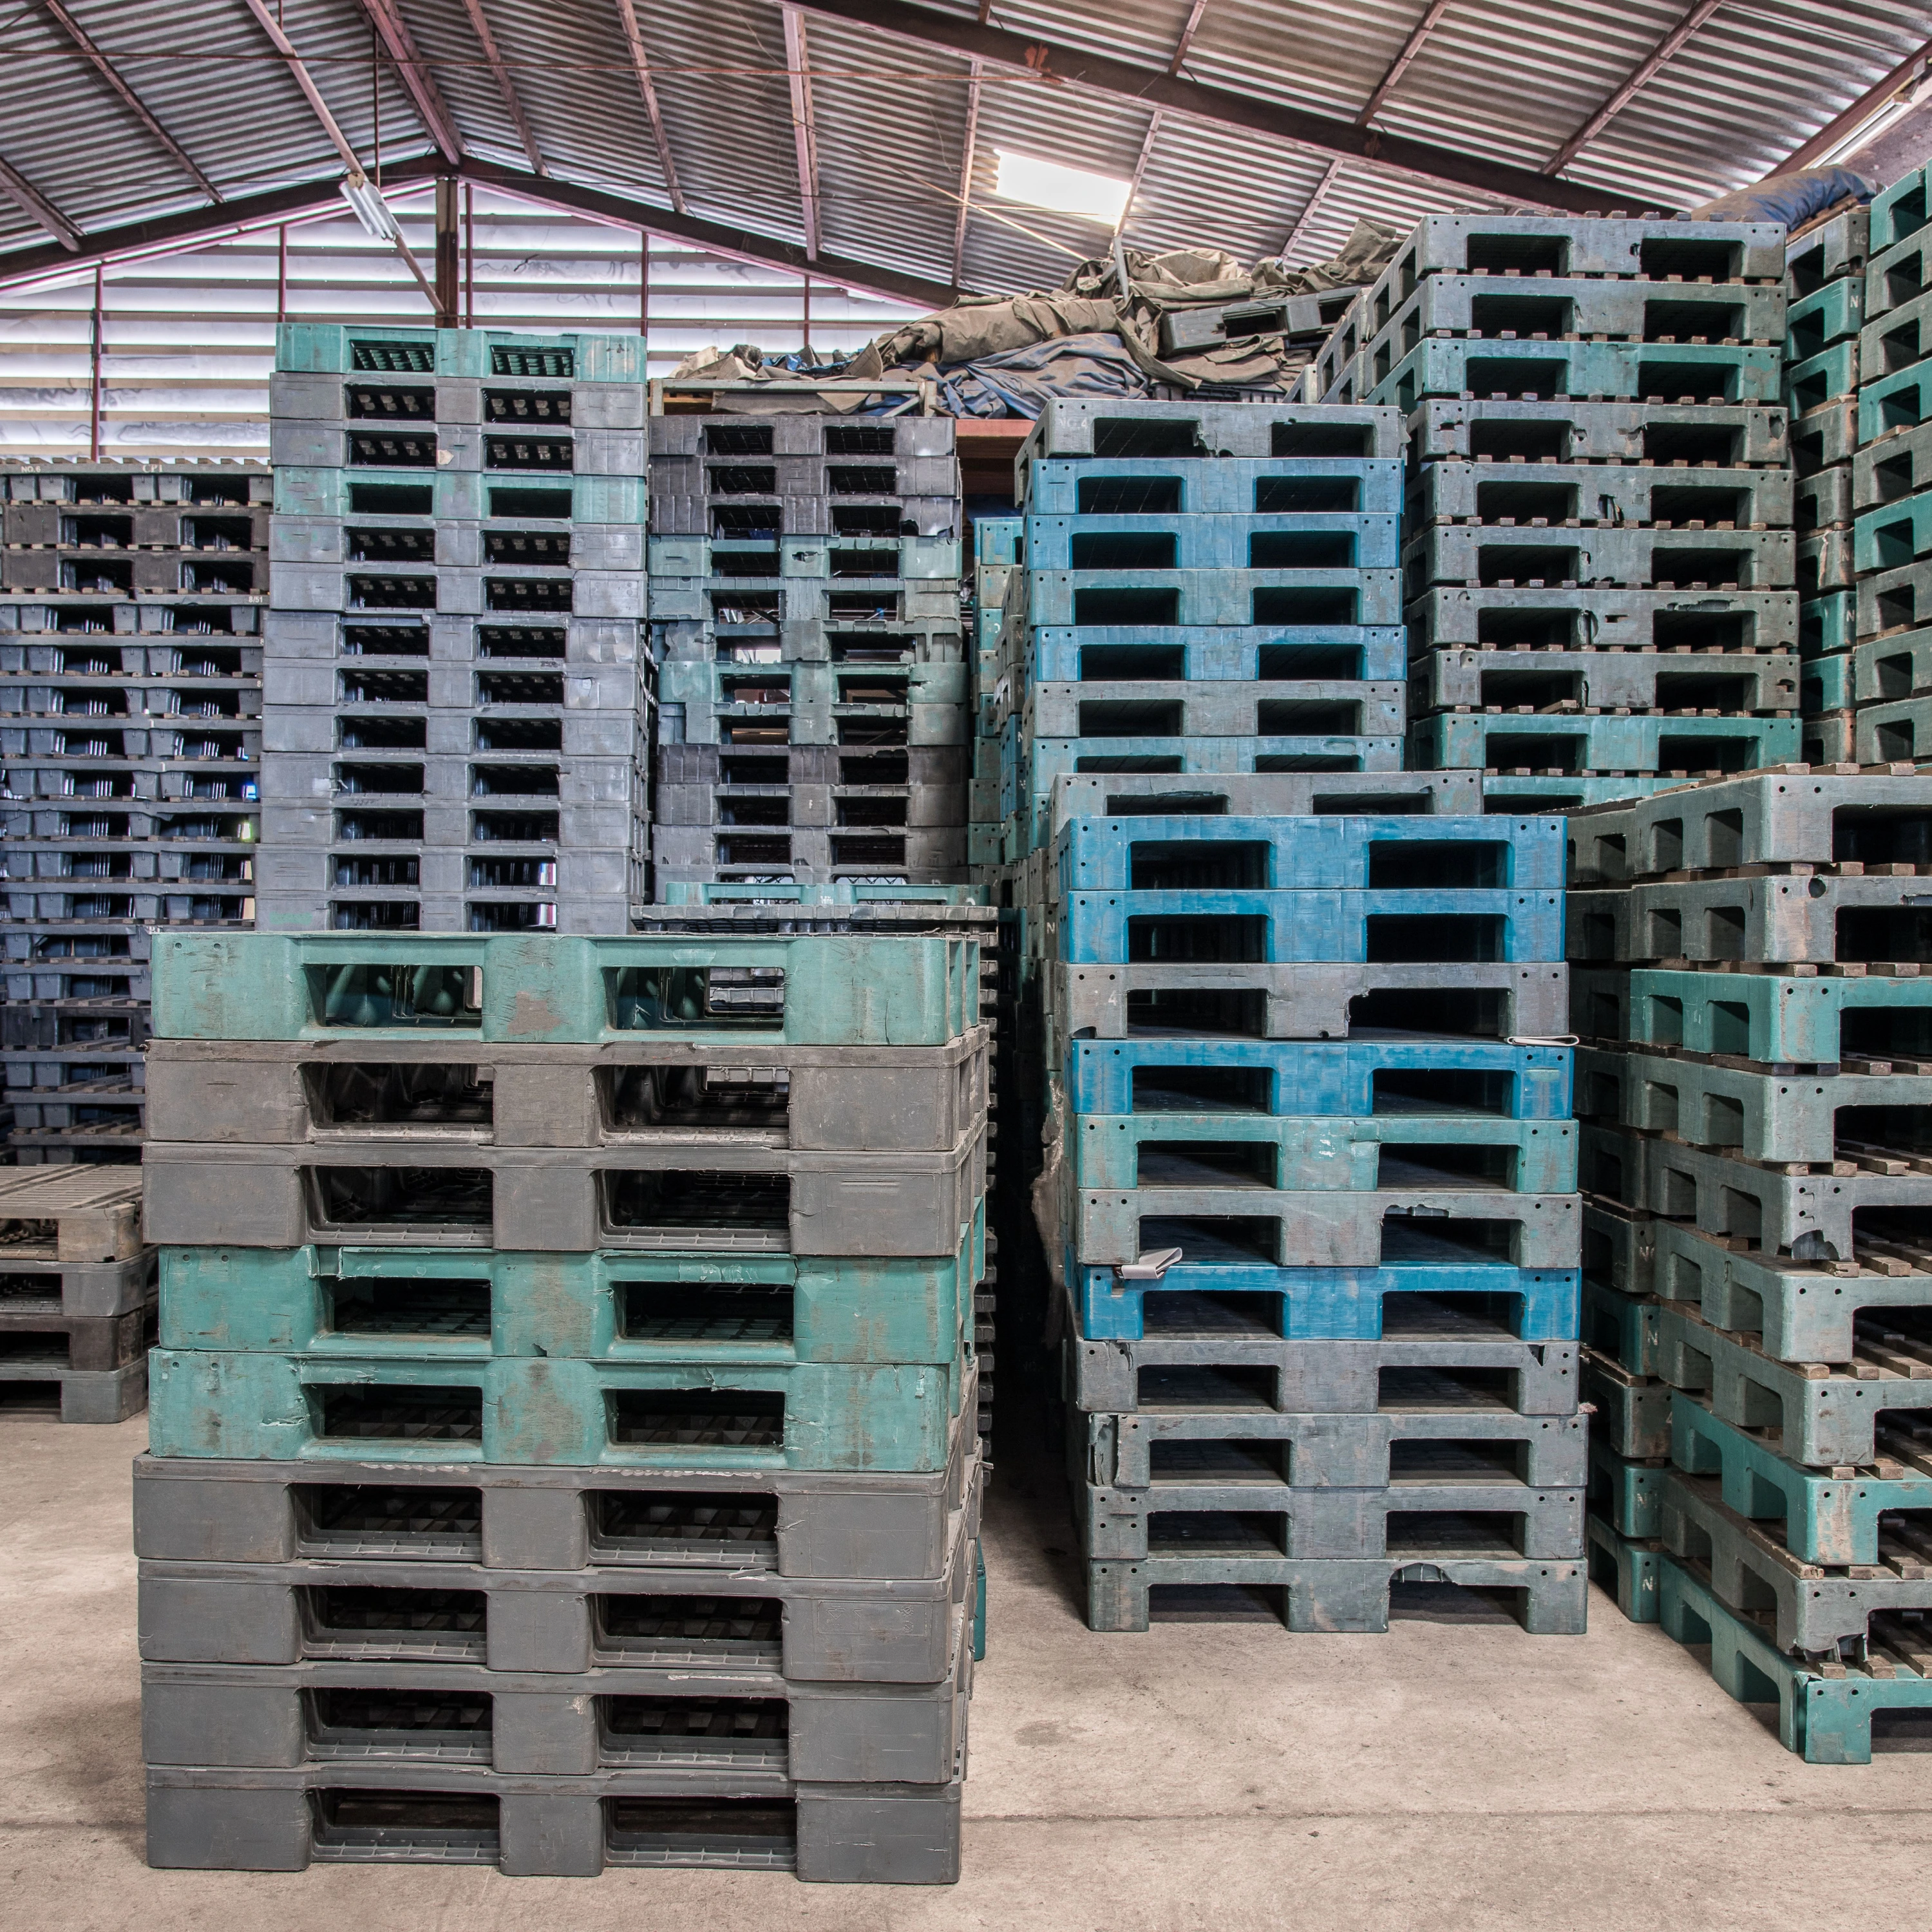 Who Can Benefit from Pallet Tracking?